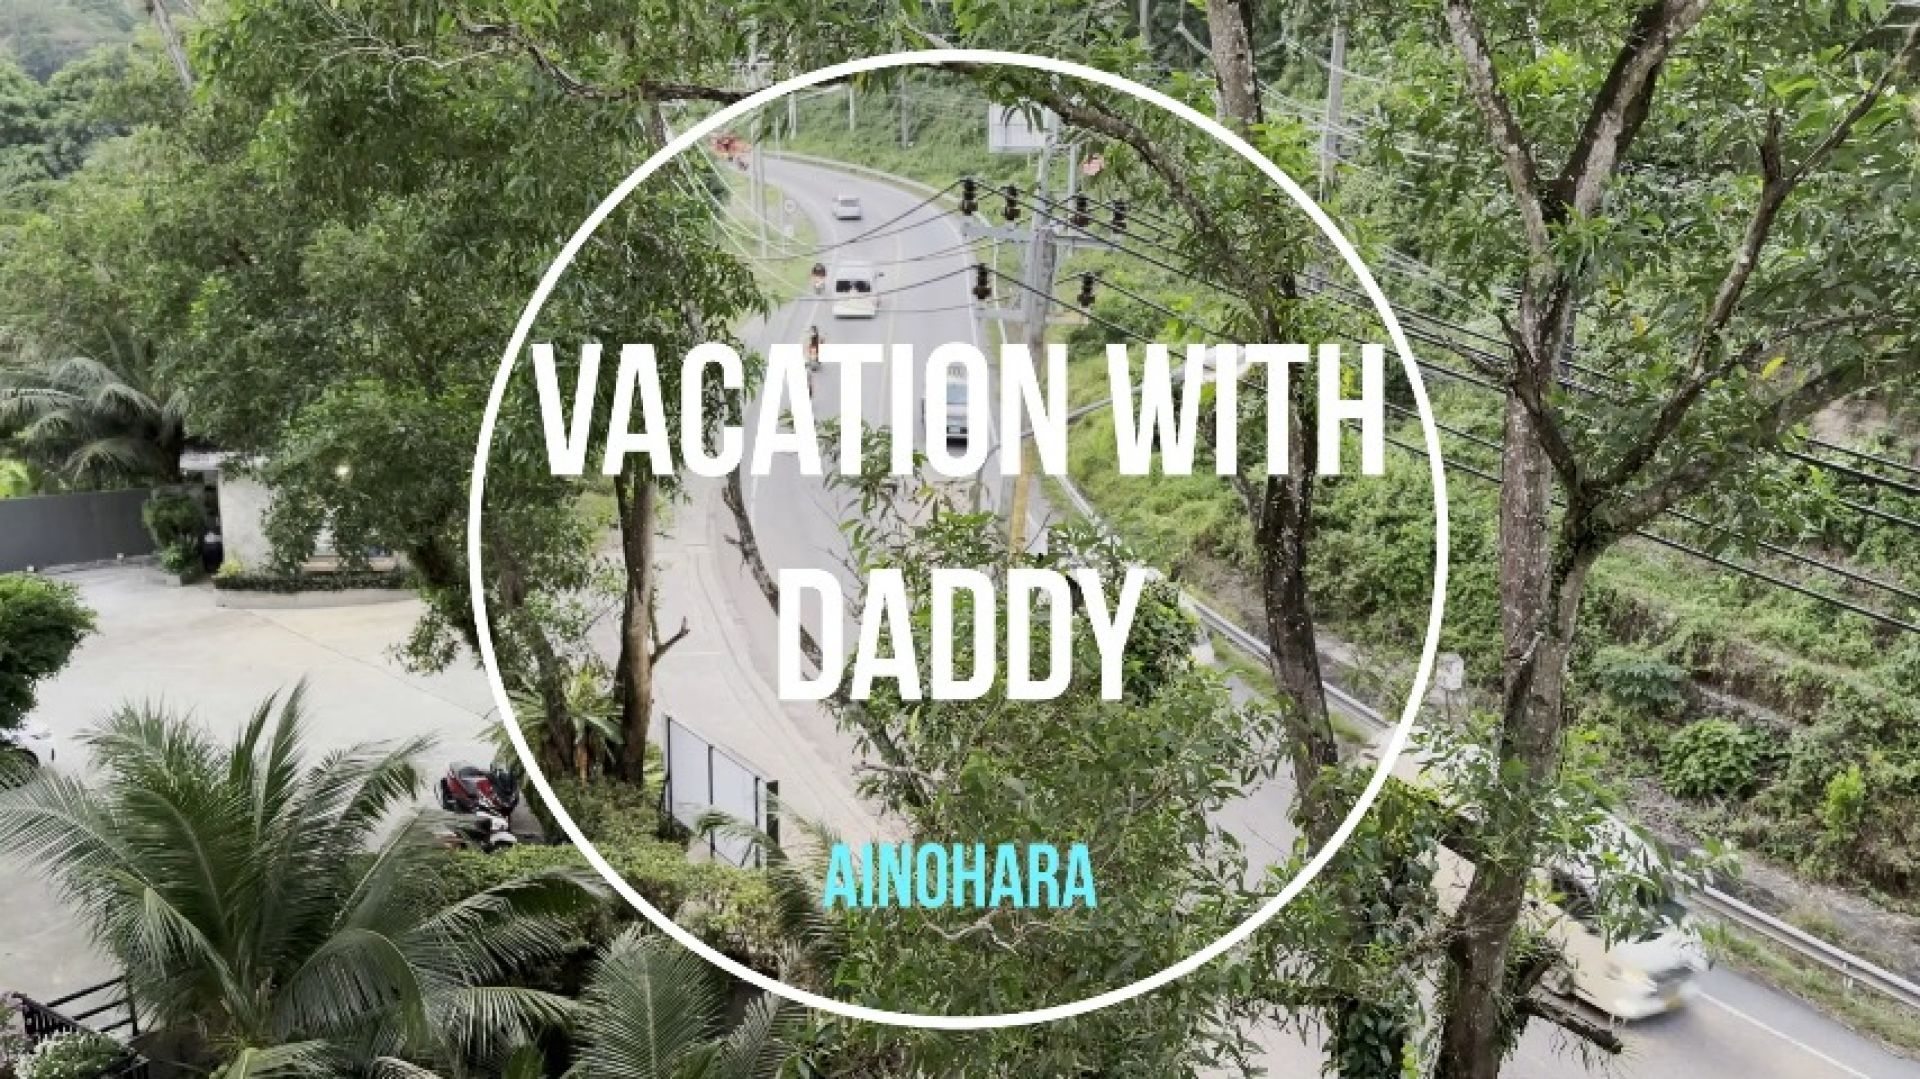 leaked Vacation with daddy video thumbnail